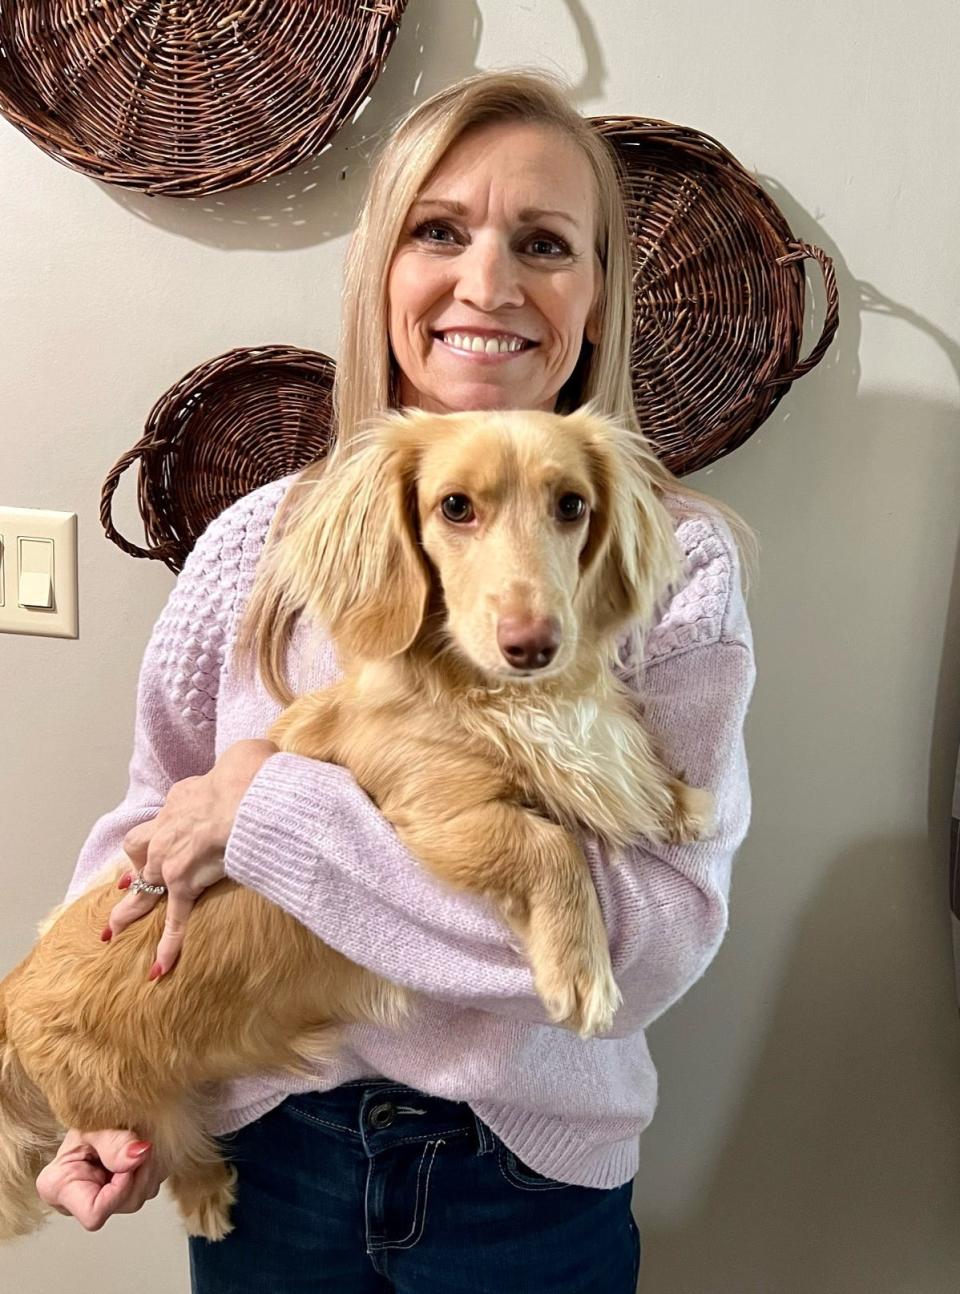 Tracey Puckett, 53, made a 10-hour round trip from Indiana, with her husband, to the Beloit area to get Huxlee. They bought the puppy from April Waidman for $1,600. They refused to pay Waidman the balance until the couple had the puppy.